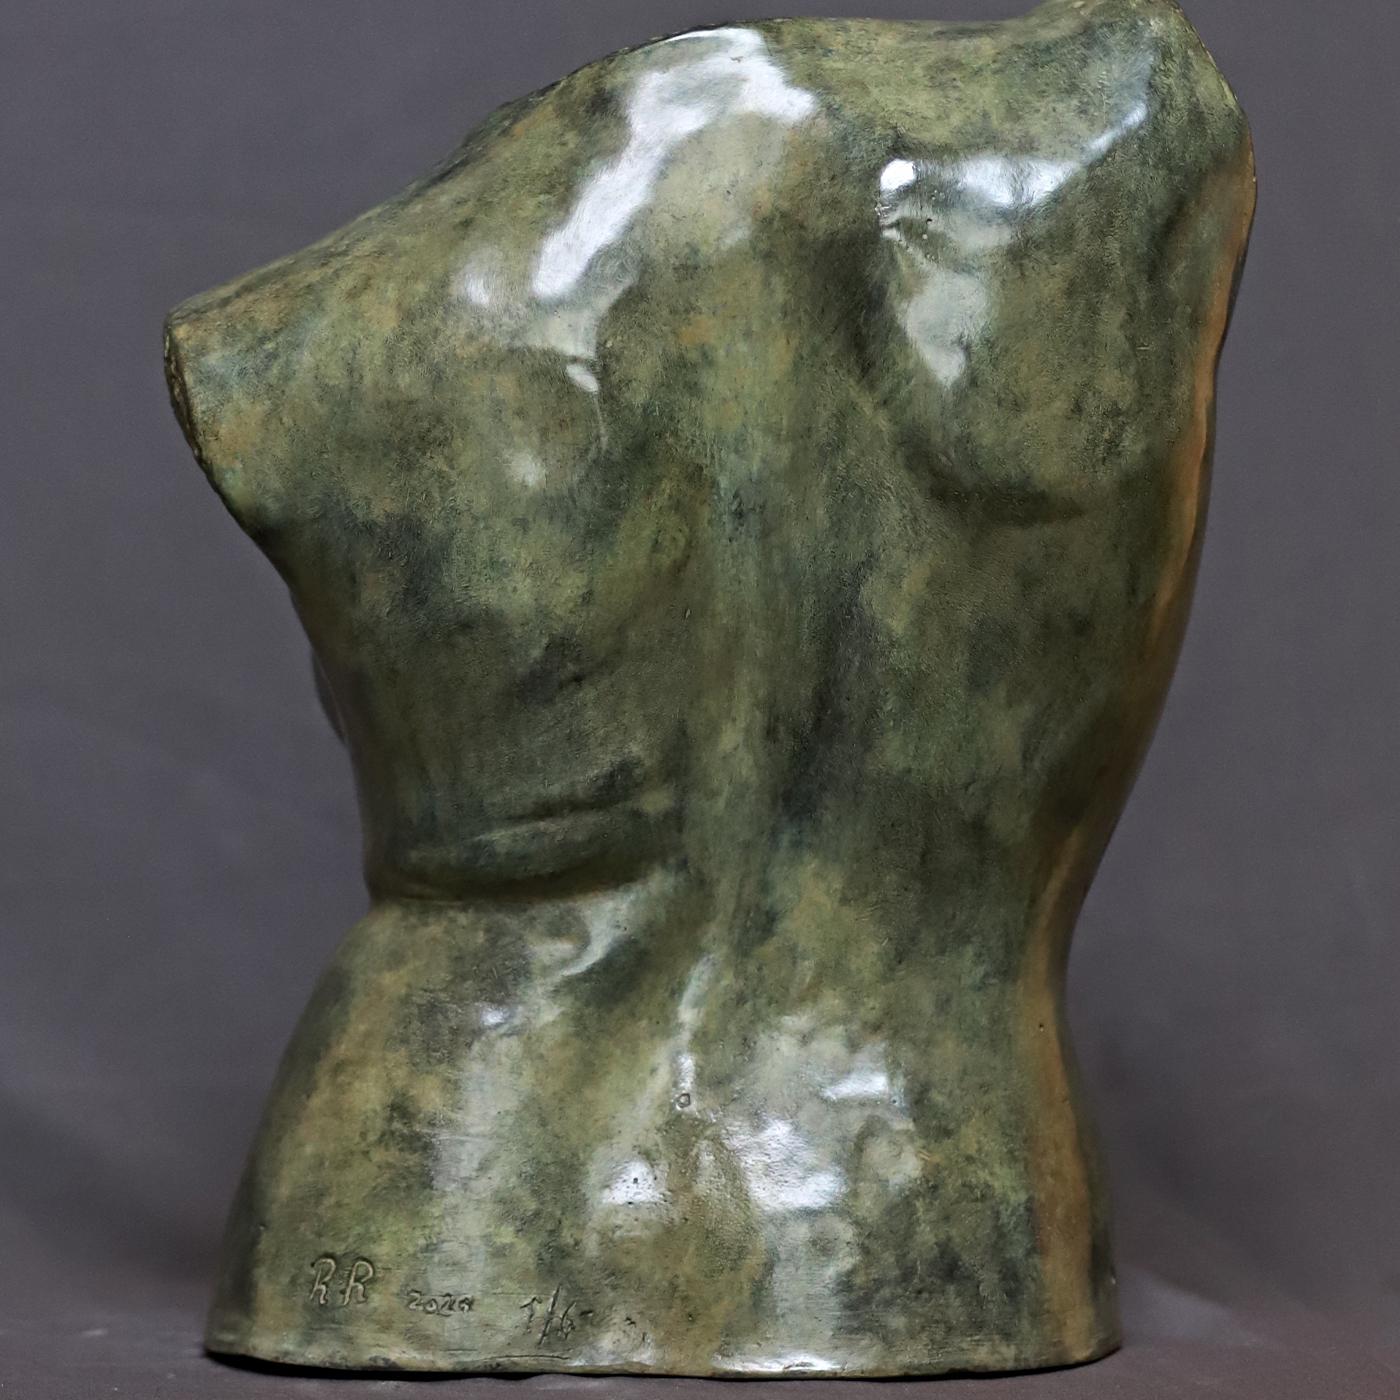 Part of a limited edition of six numbered pieces signed by Raffaello Romanelli, this stupendous artwork is a bronze sculpture of a young and flawless female bust. Sinuous and dynamic, it is modeled in a live session. An extraordinary piece to add to